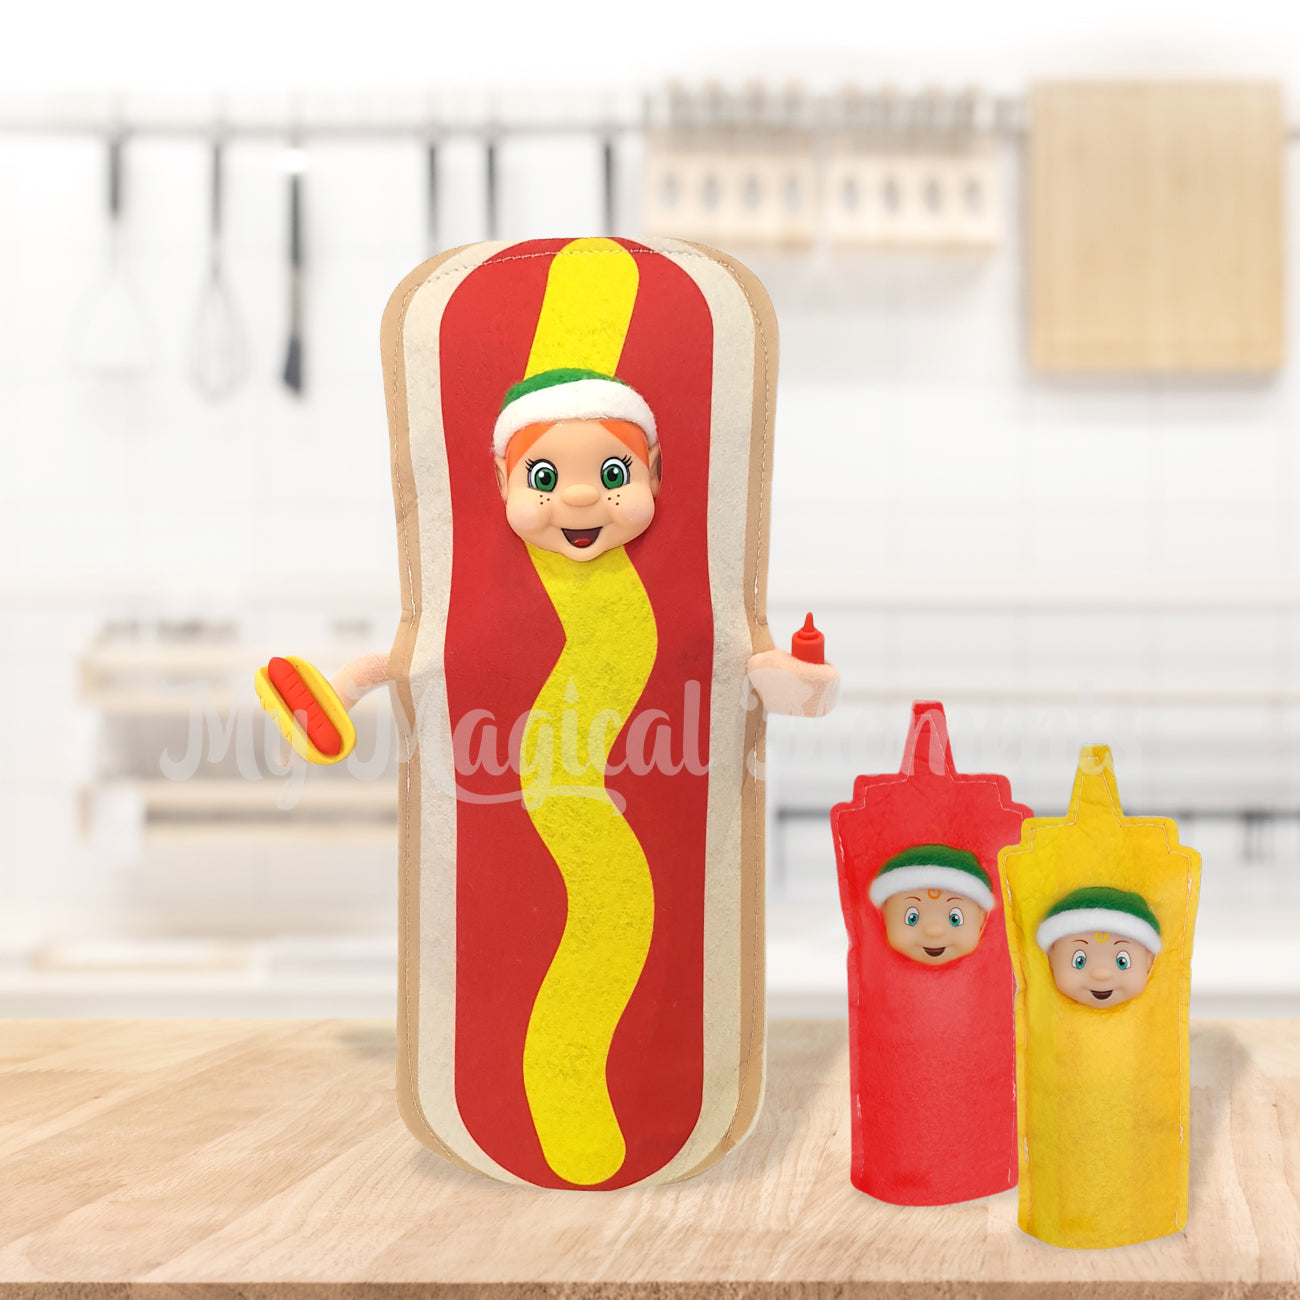 Elf dressed as a hot dog with elf toddlers dressed as tomato sauce and mustard